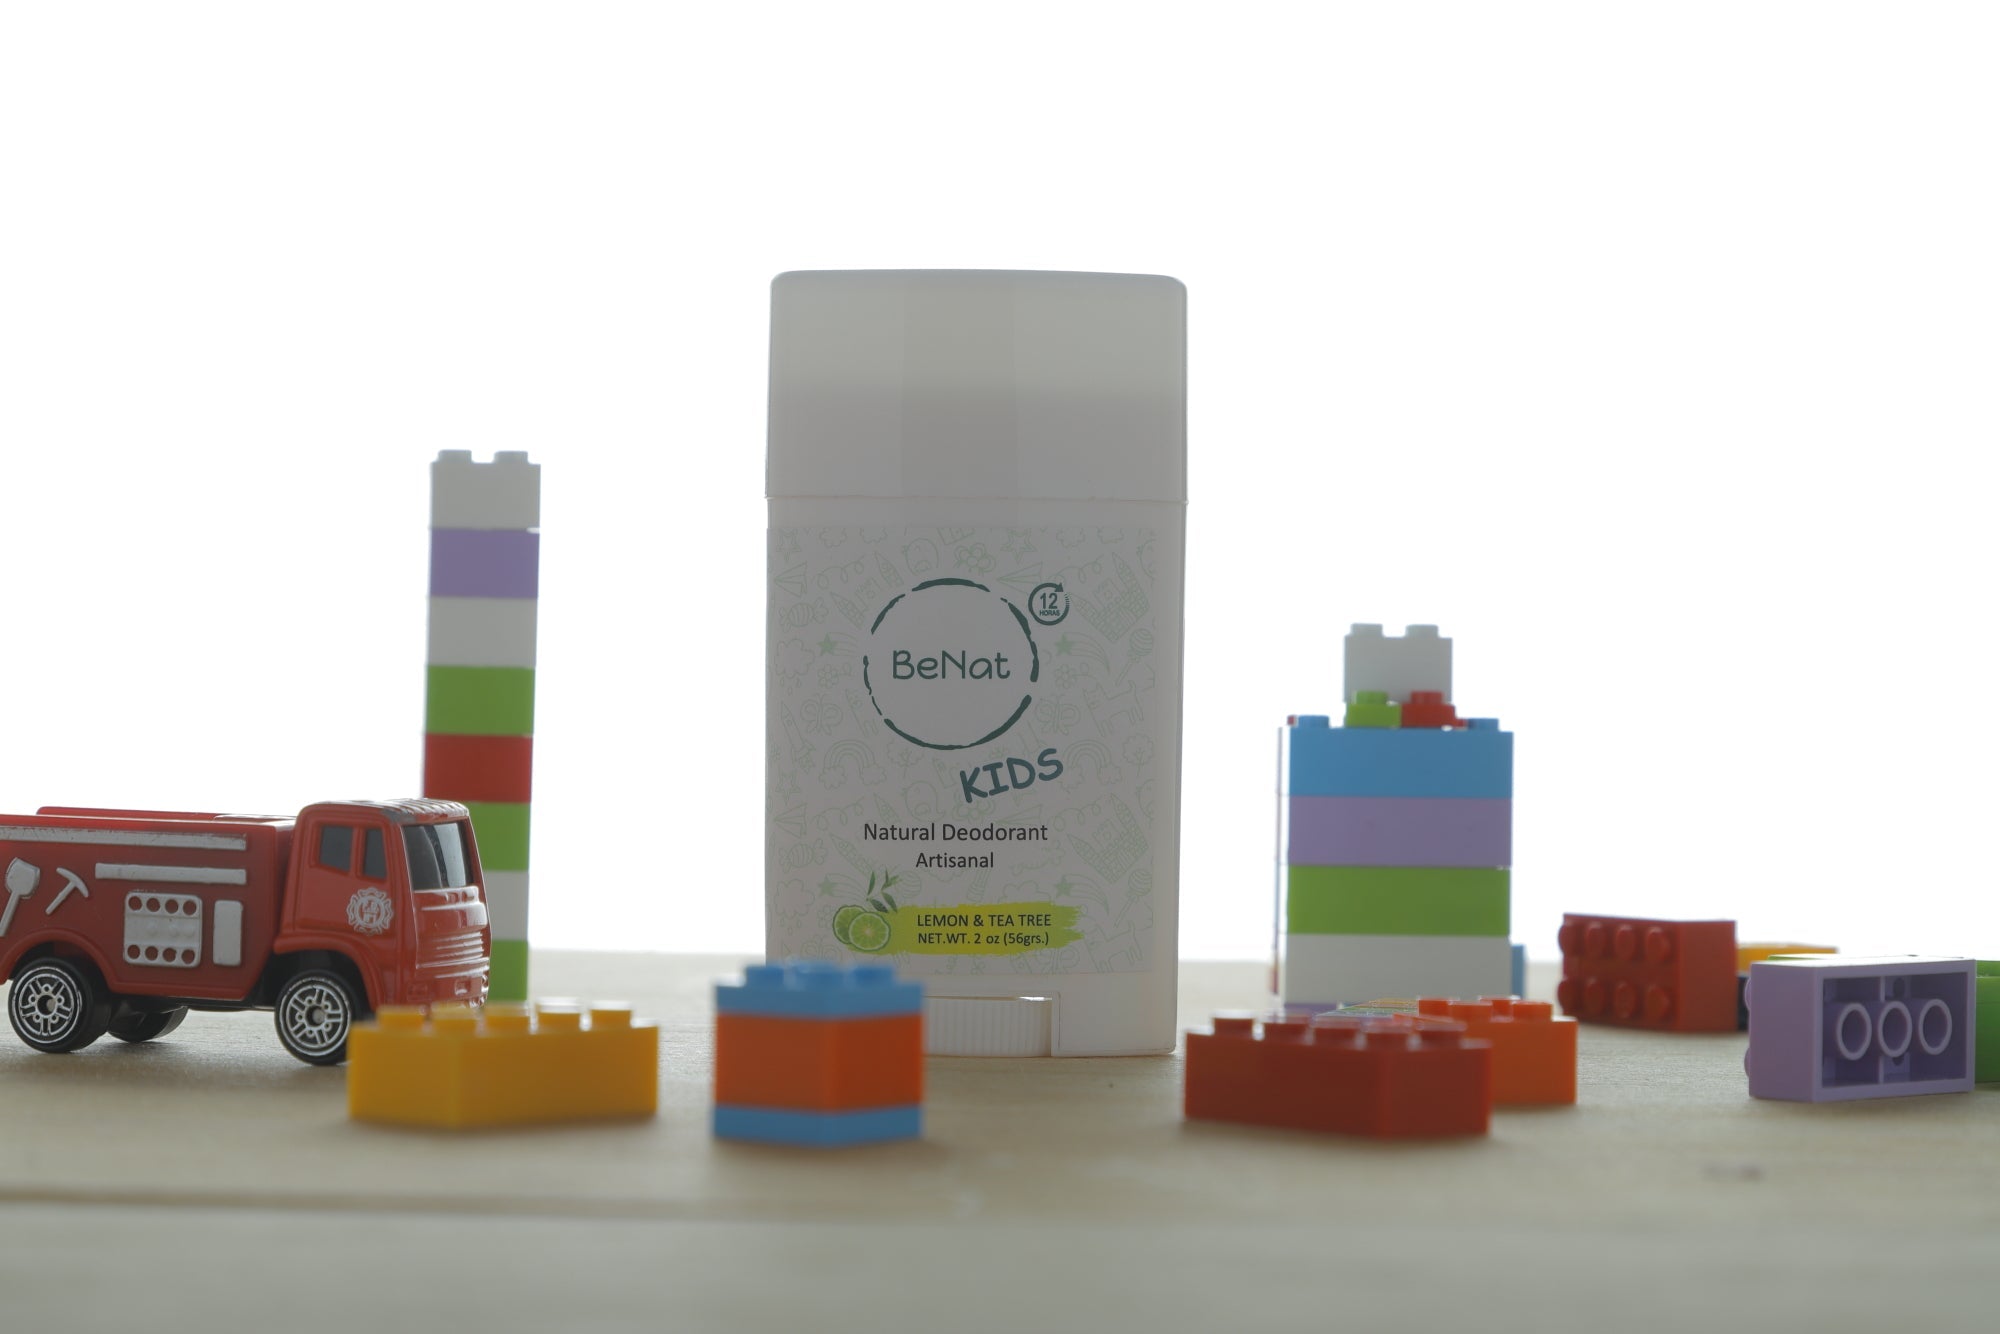 All-Natural Deodorants for Kids & Teens